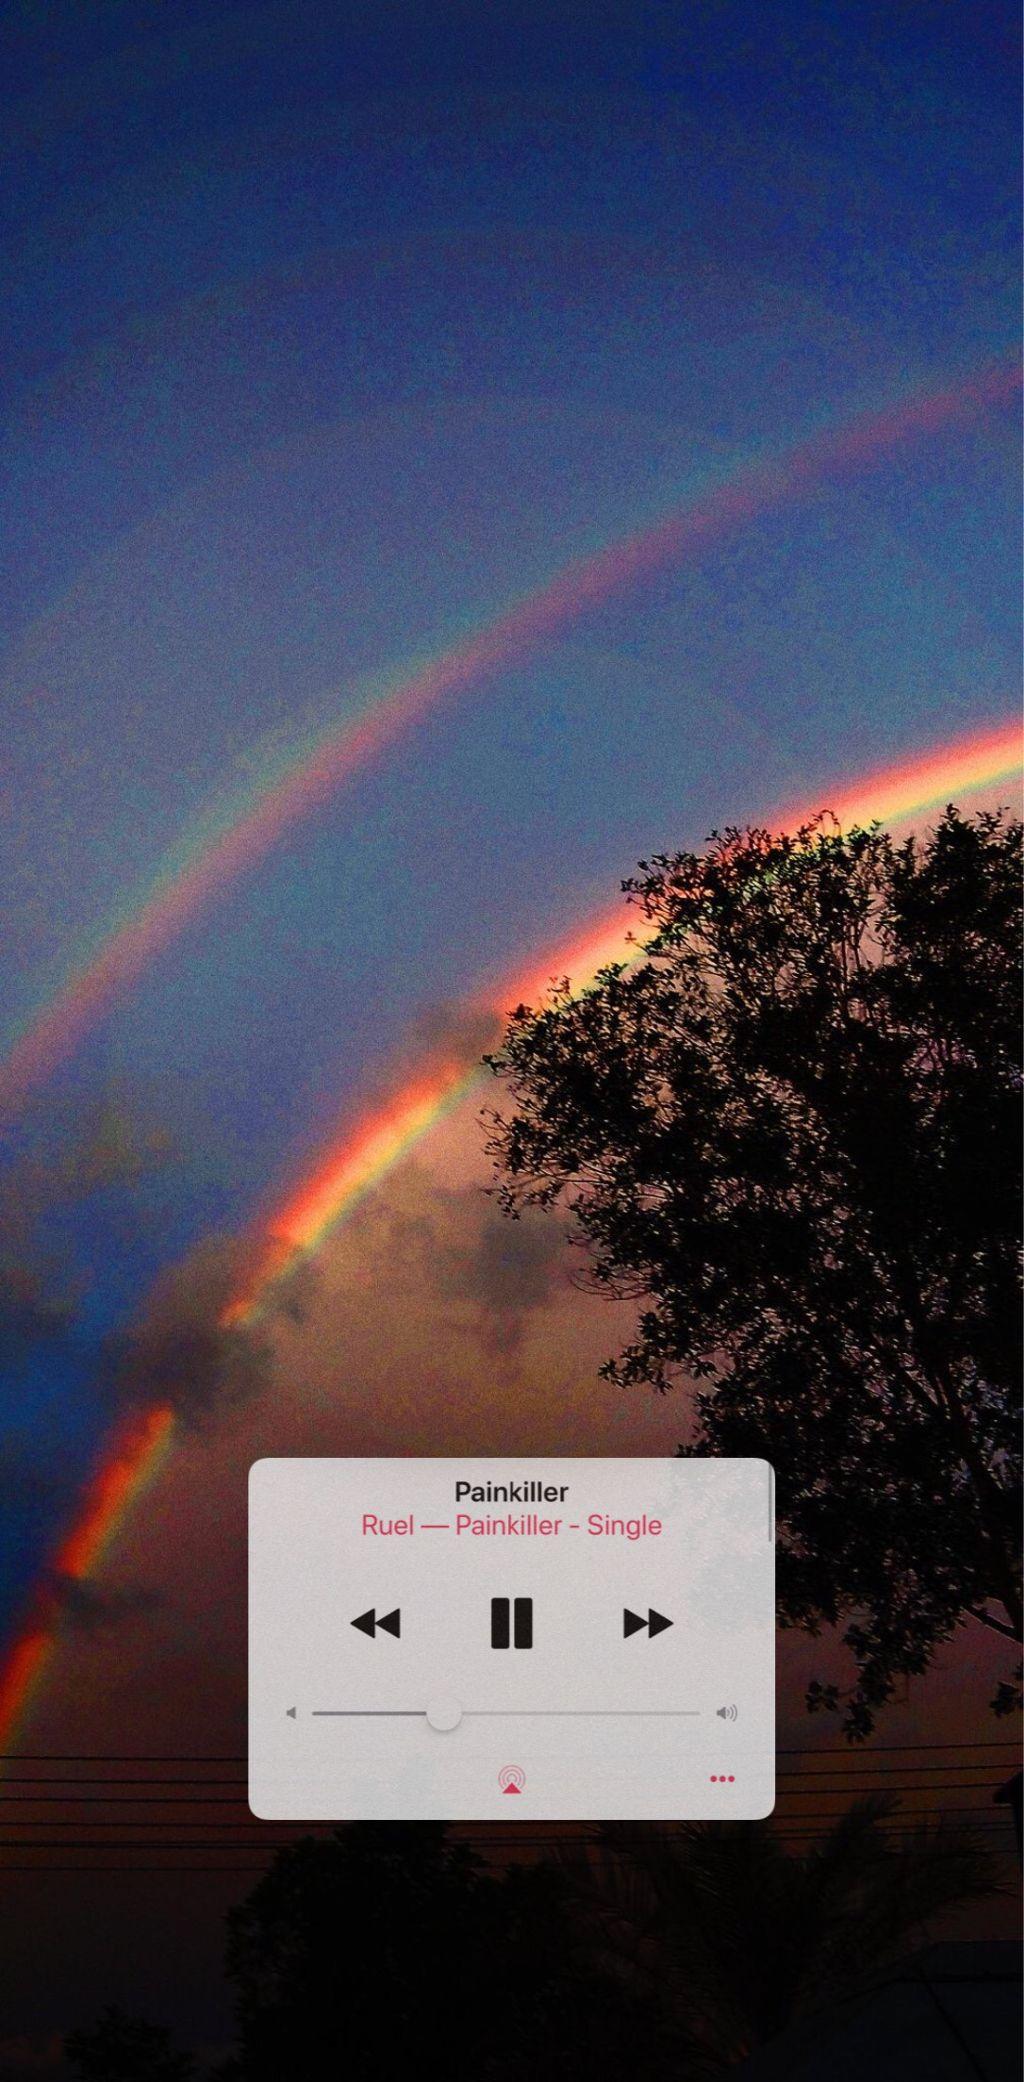 A picture of the sky with rainbow colors - Colorful, rainbows